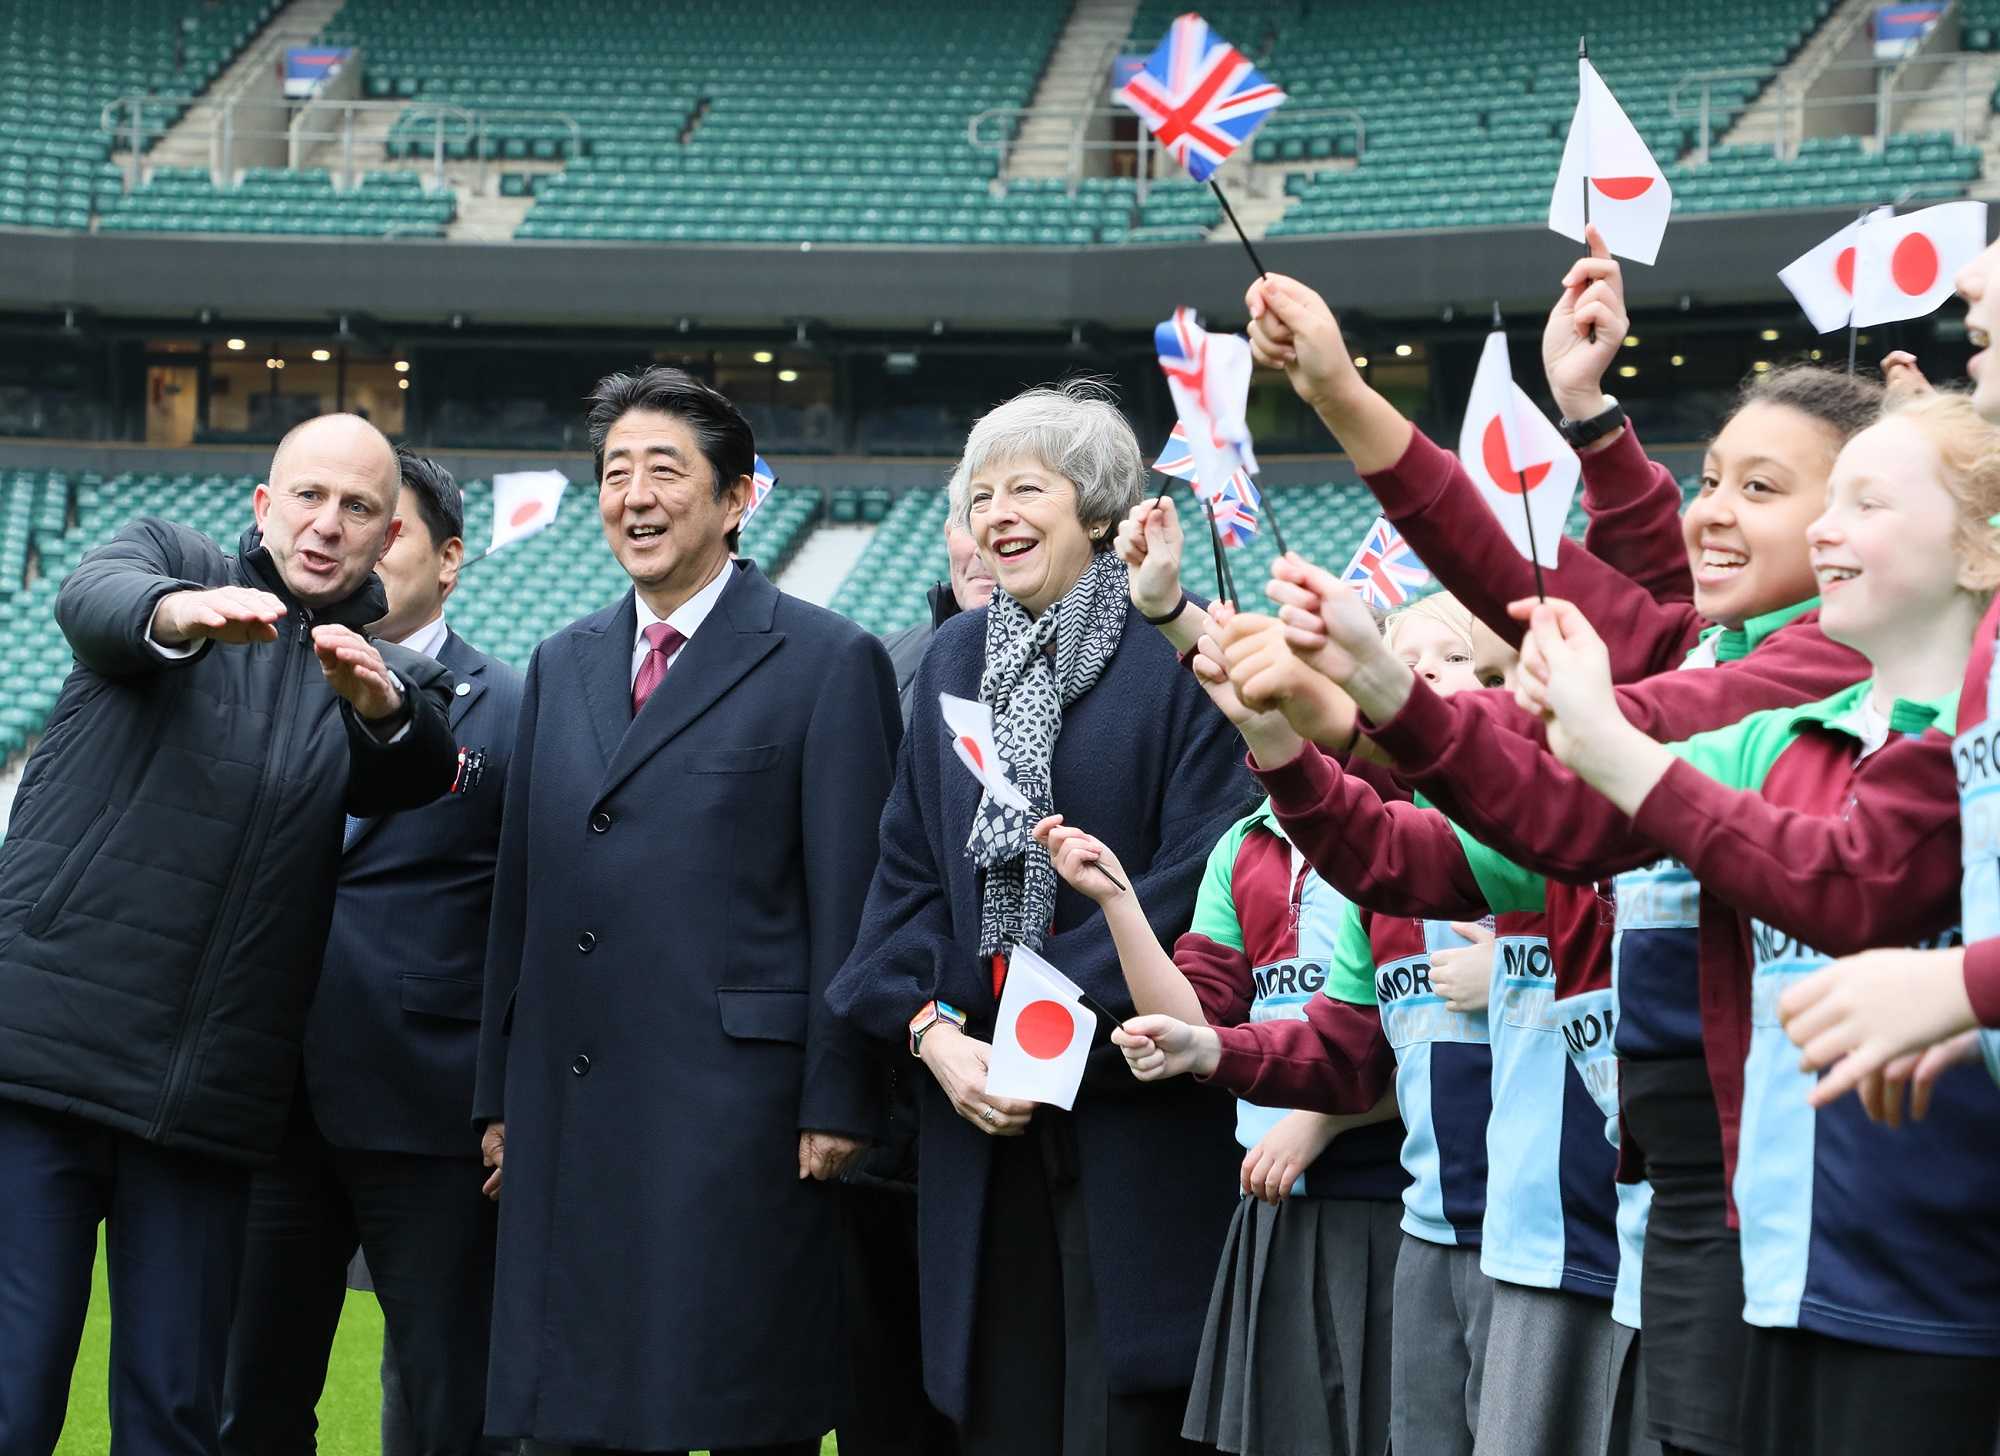 Photograph of the Prime Minister attending a children’s rugby tournament